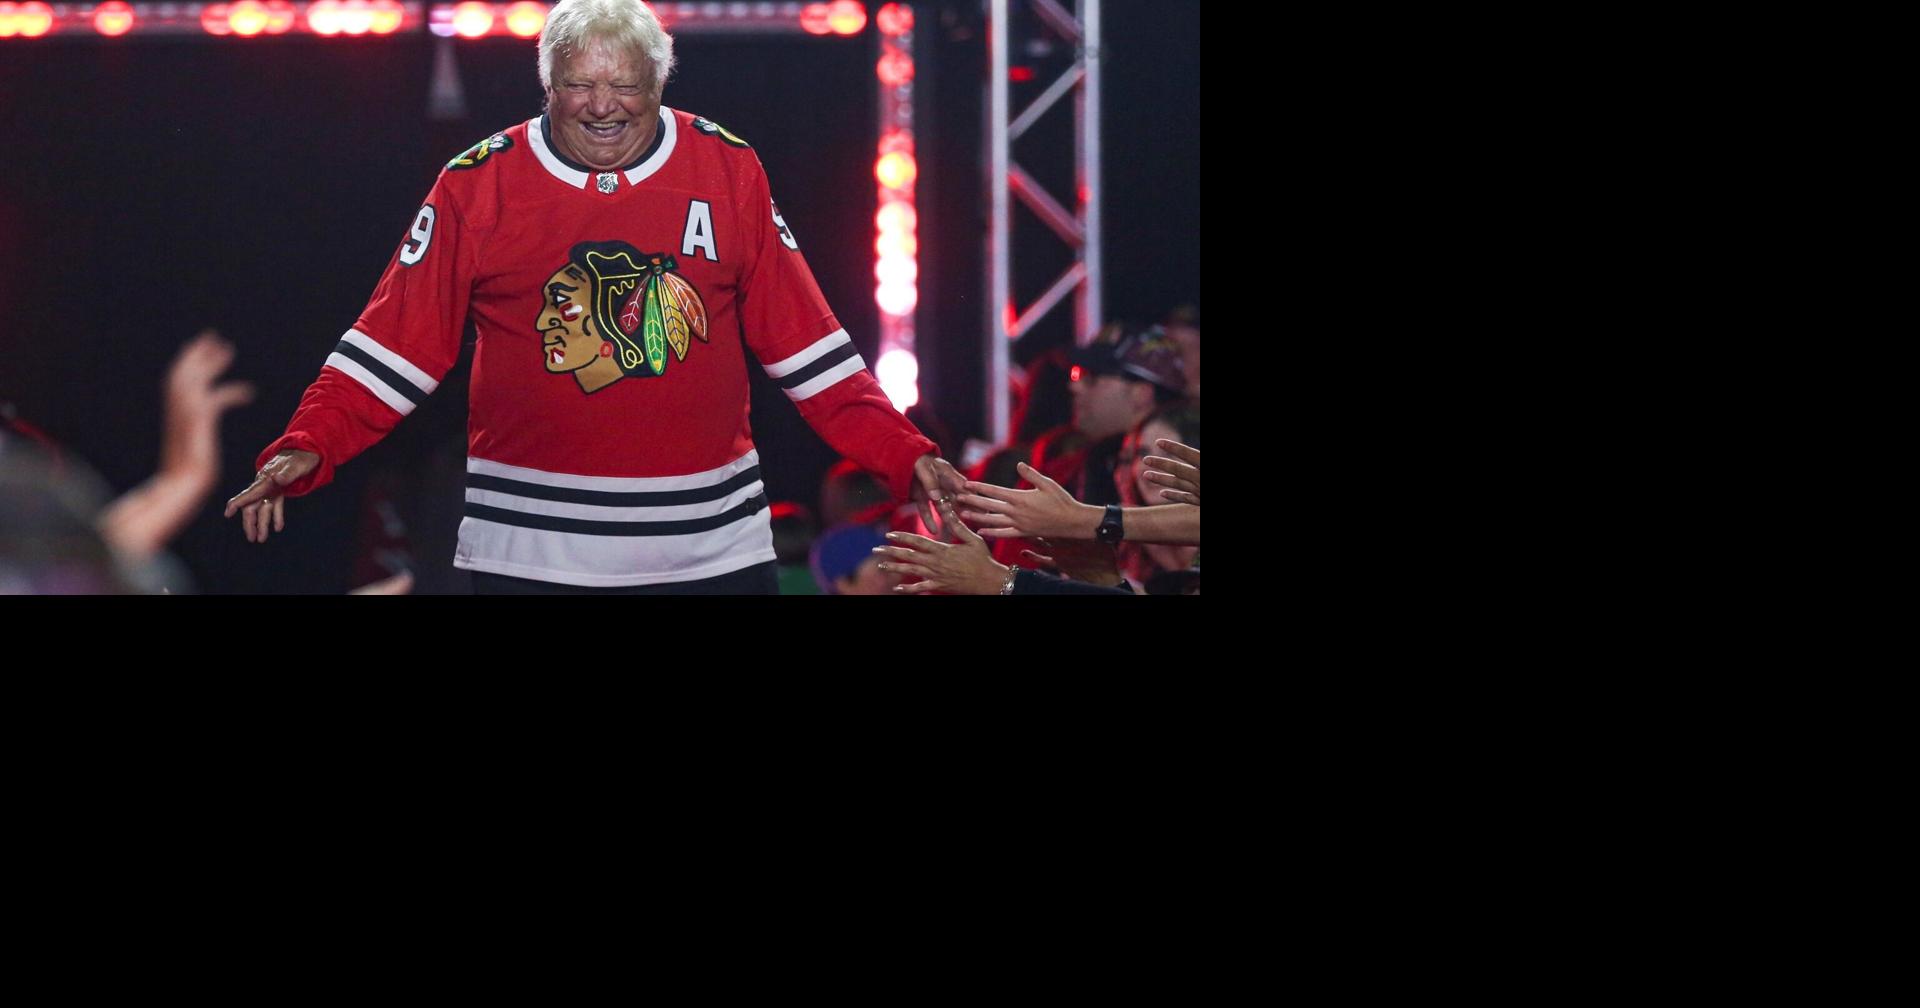 Bobby Hull 'The Golden Jet' has died -  - Local news,  Weather, Sports, Free Classifieds and Job Listings for High River, AB and  southern Alberta